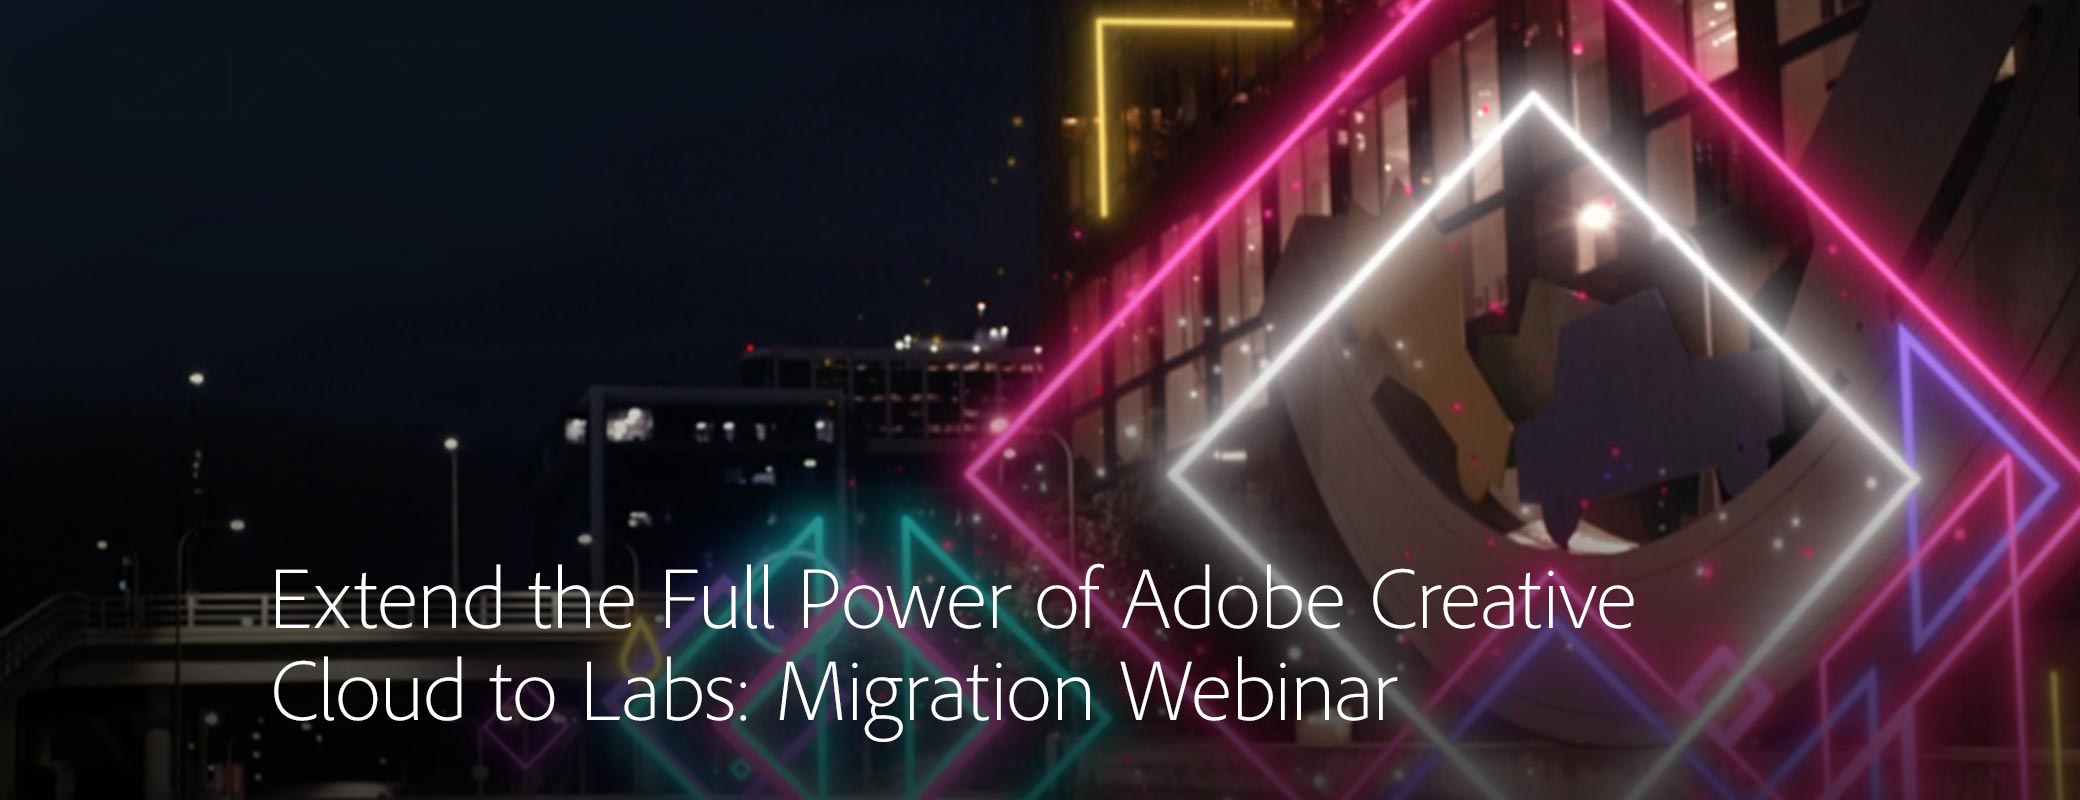 Extend the Full Power of Adobe Creative Cloud to Labs: Migration Webinar